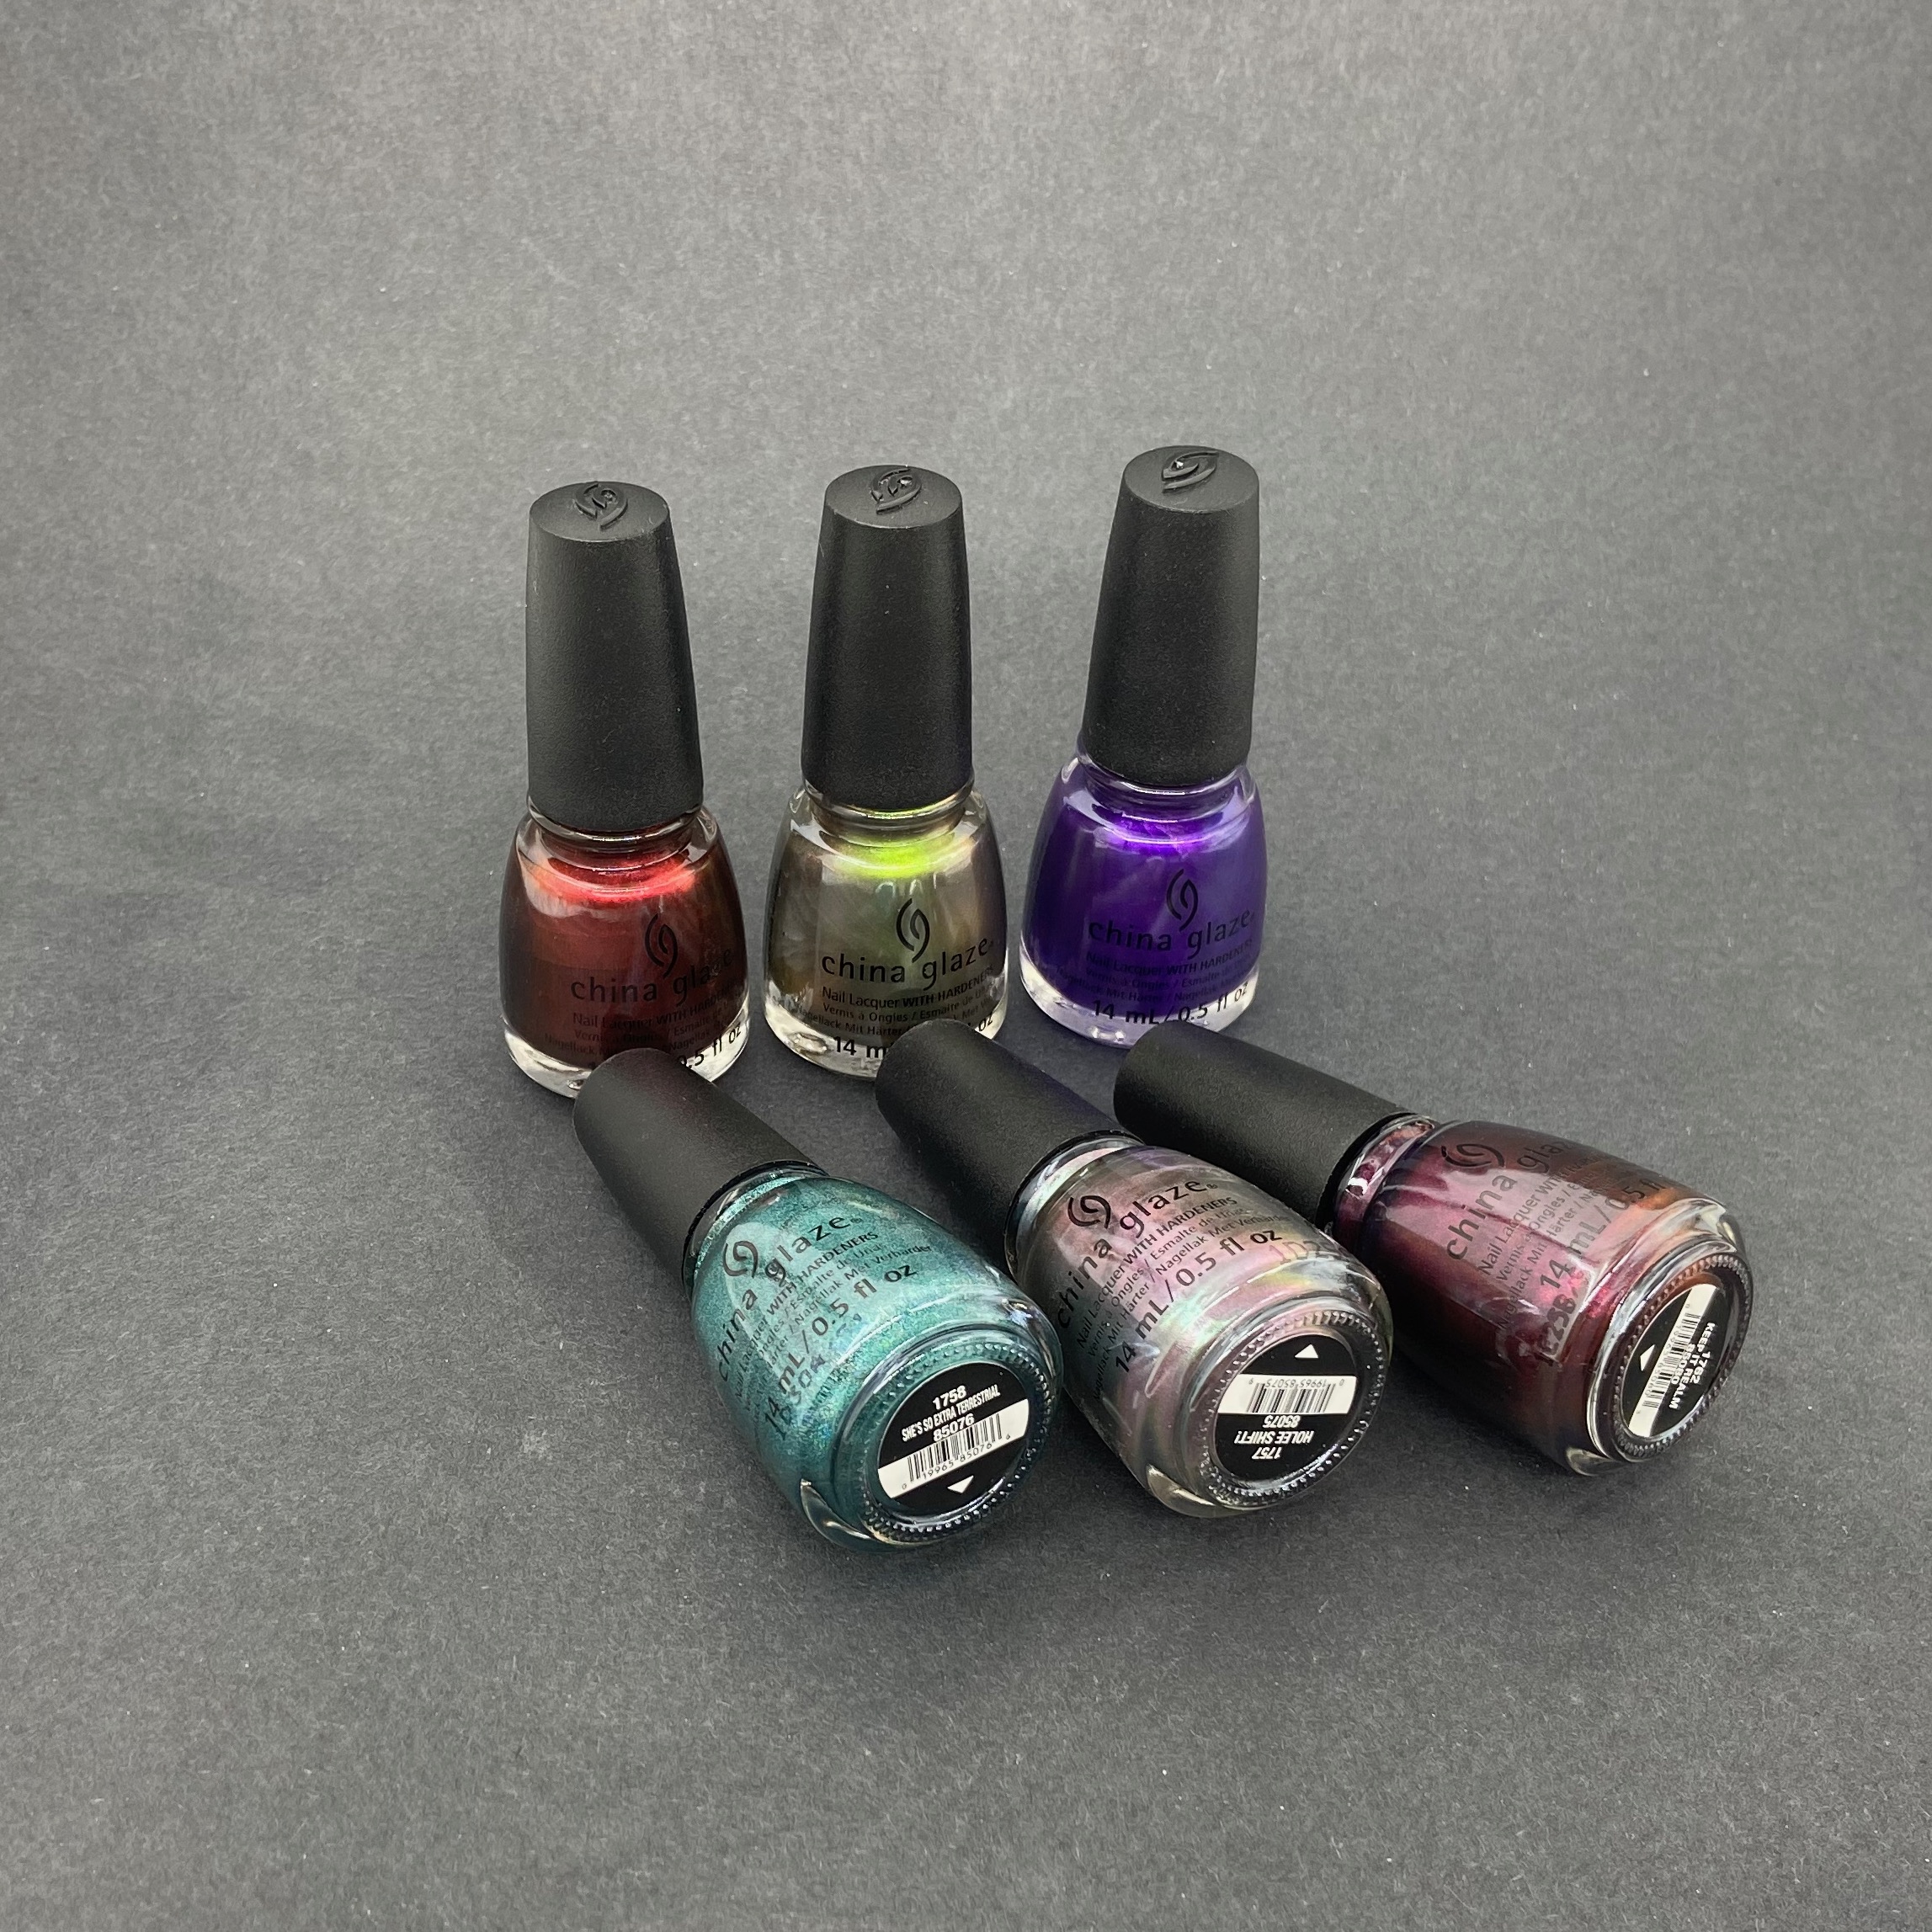 China Glaze Xtra Stellar Collection for Halloween 2021 Review